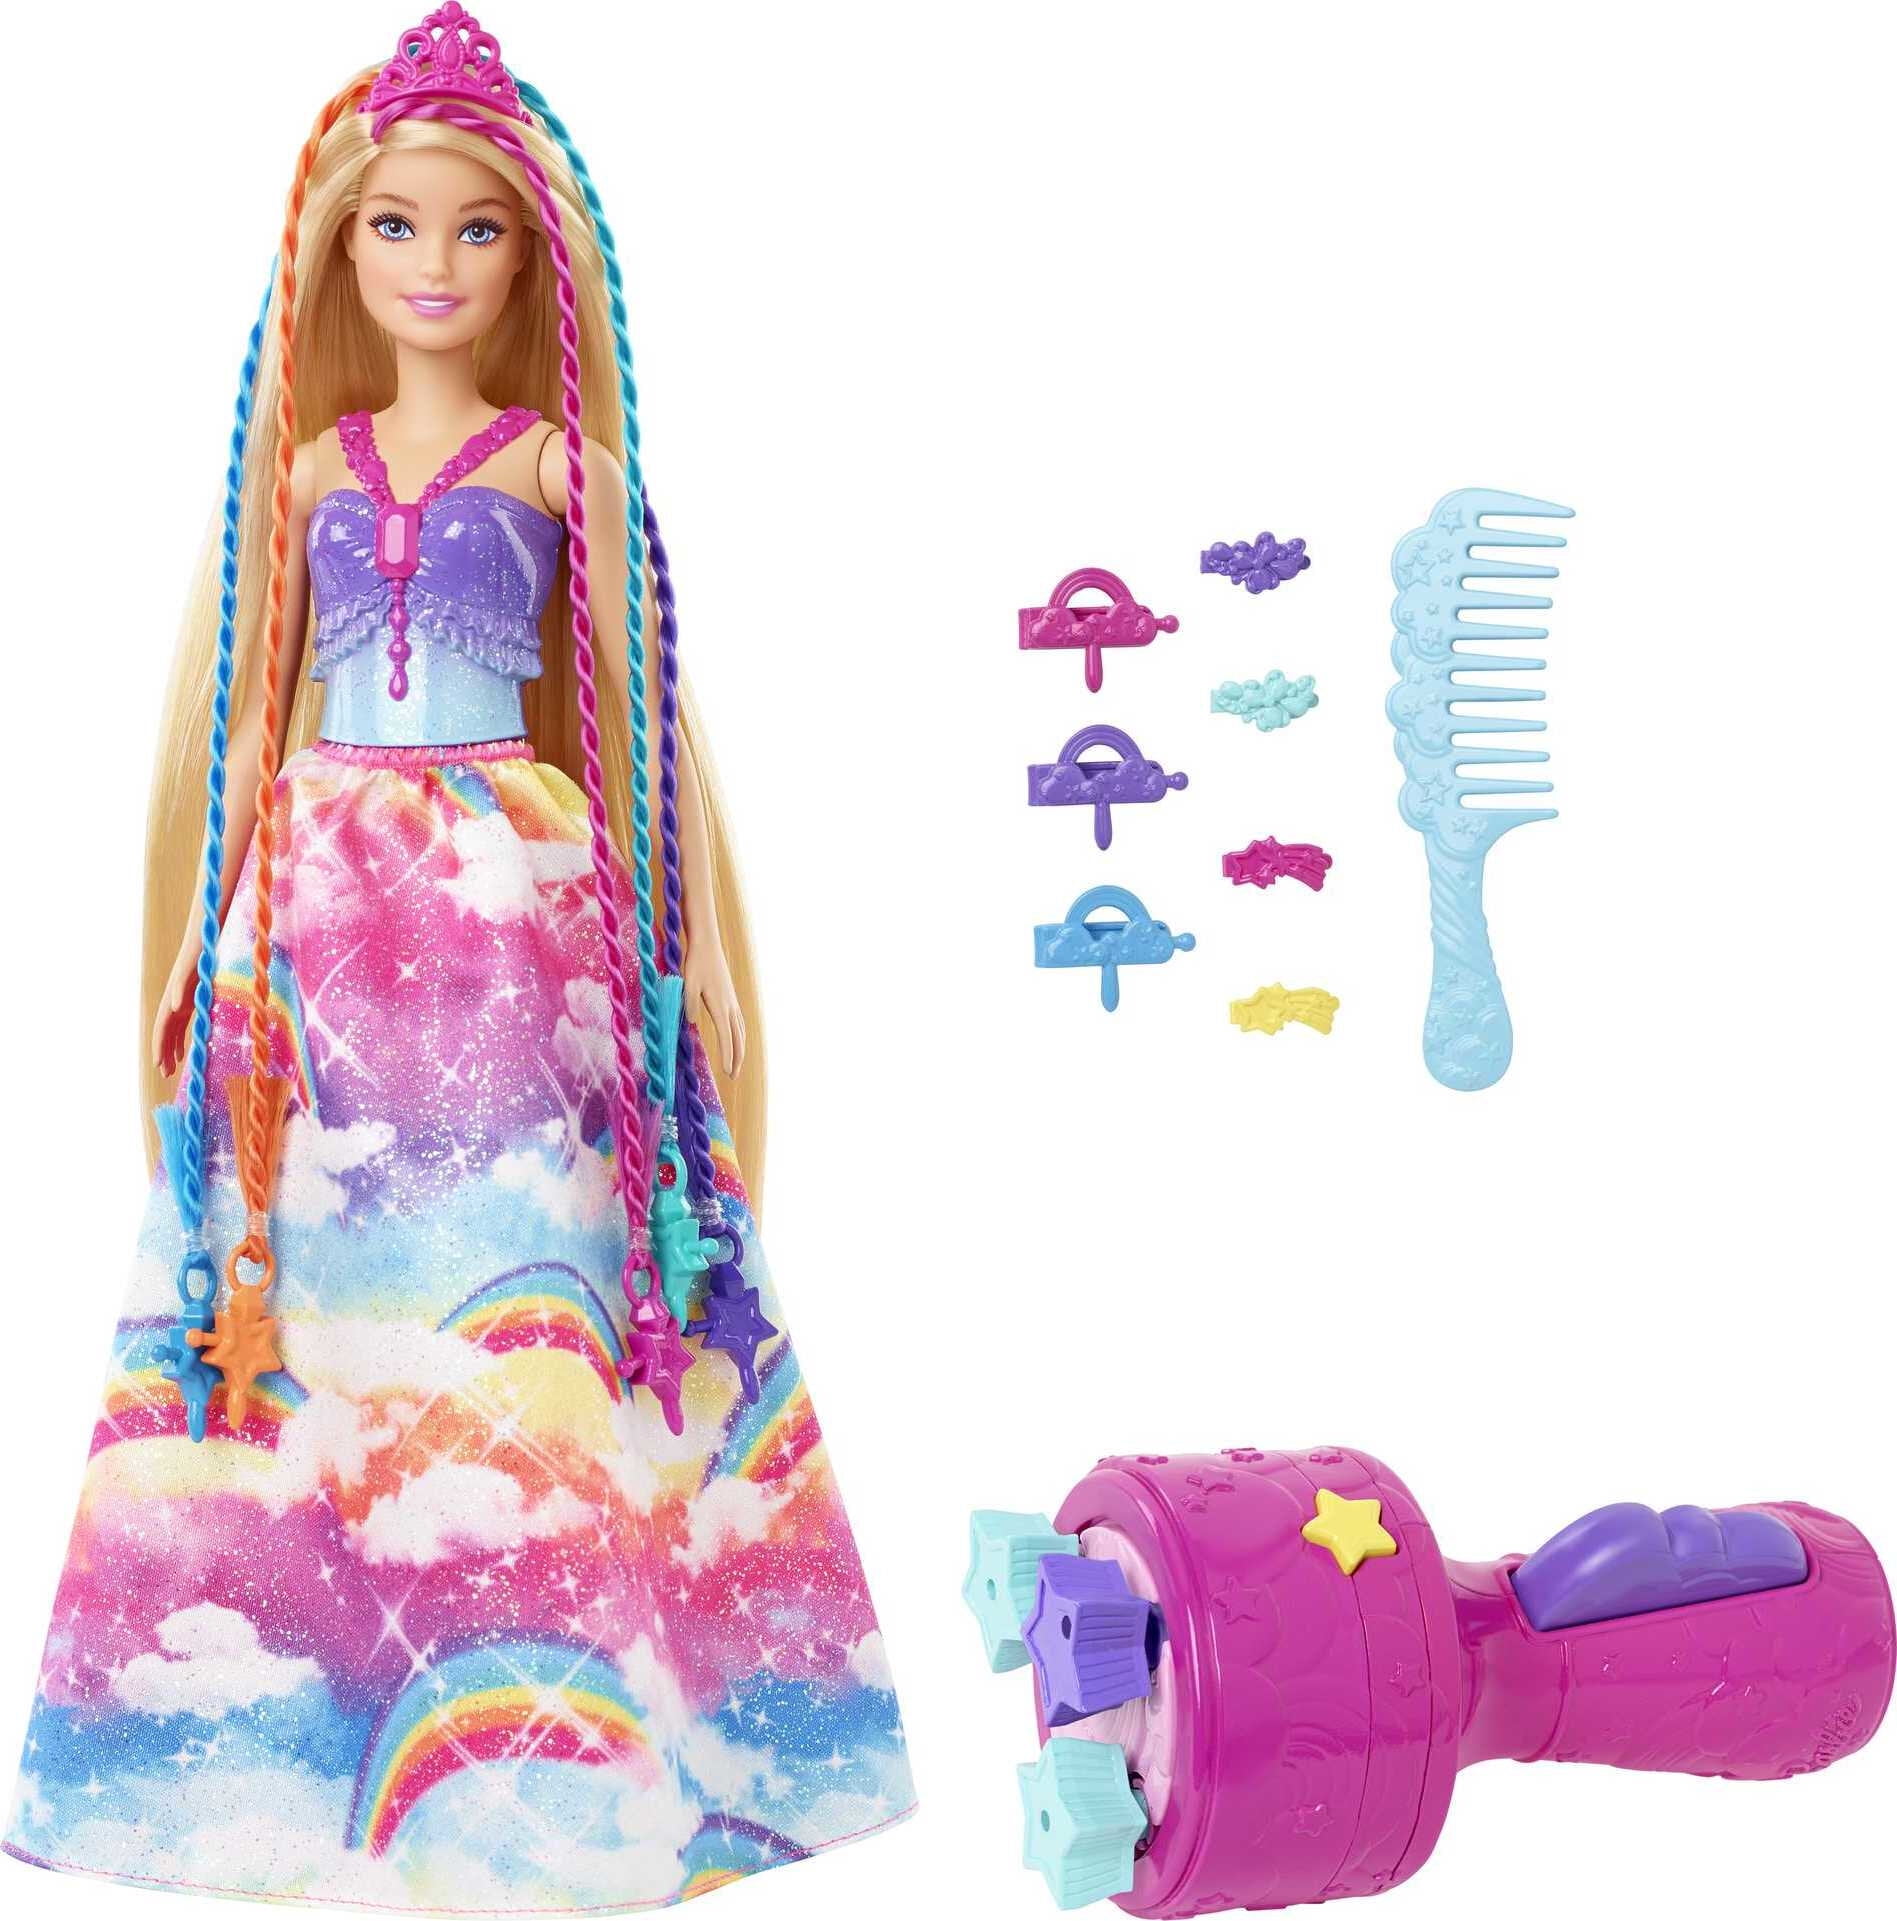 Barbie Dreamtopia Twist N Style Princess Hairstyling Doll Accessories 3 To 7 Years Walmart Com